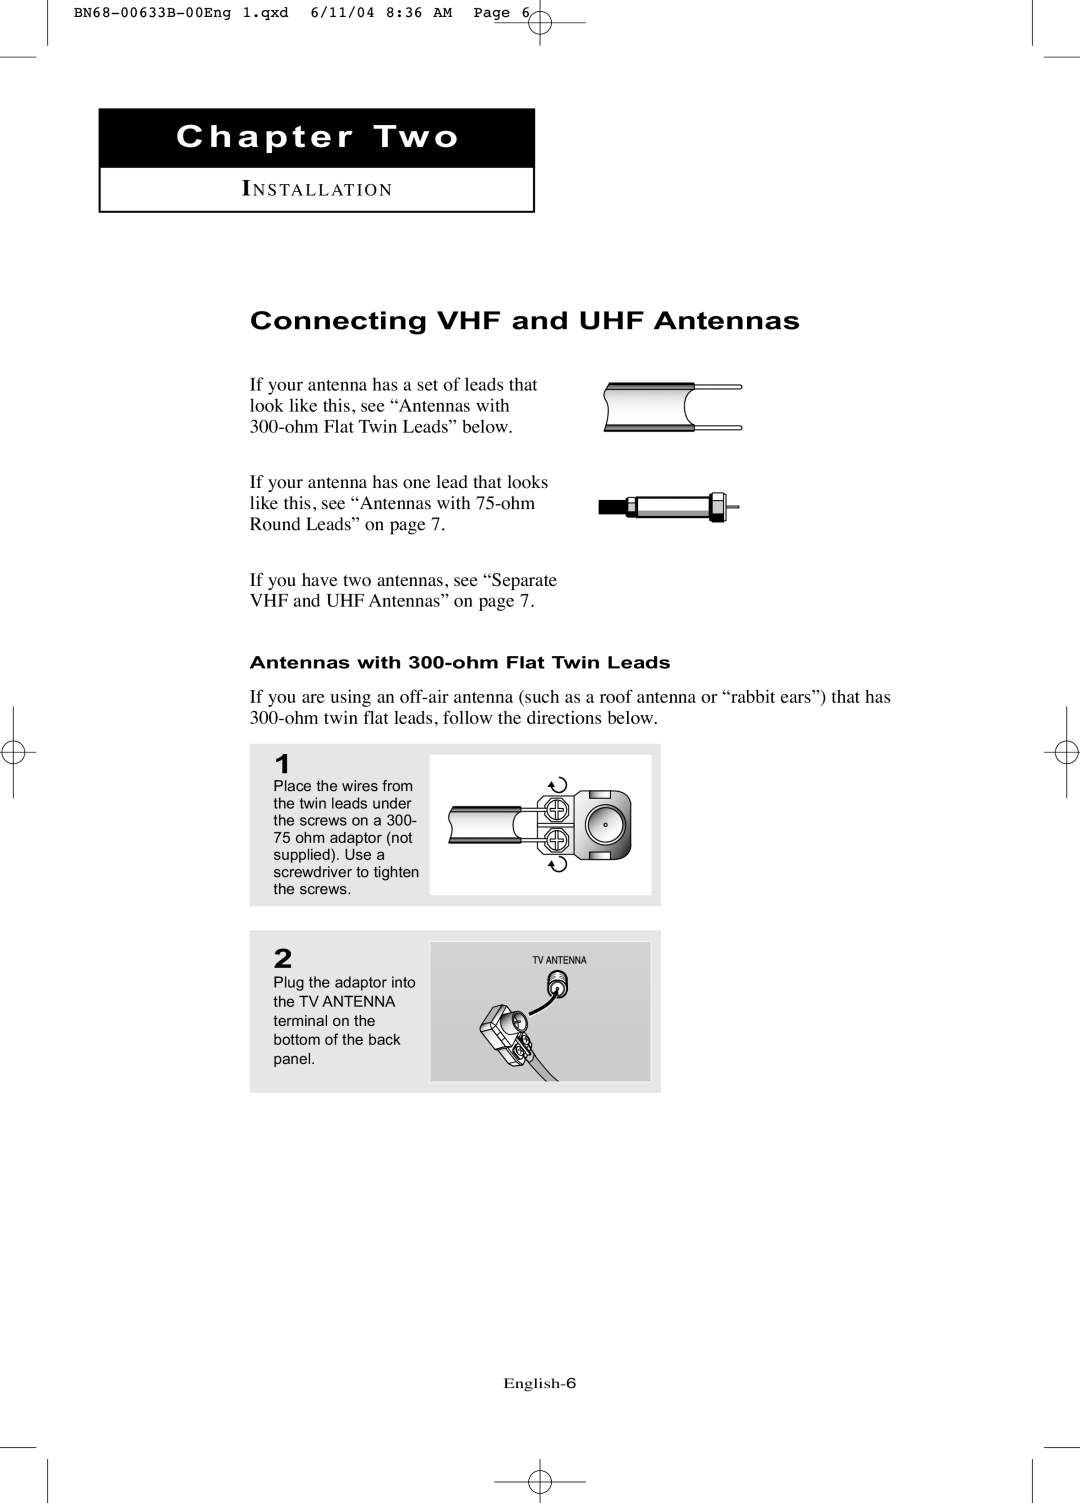 Samsung LT-P1545 manual Chapter Two, Connecting VHF and UHF Antennas 